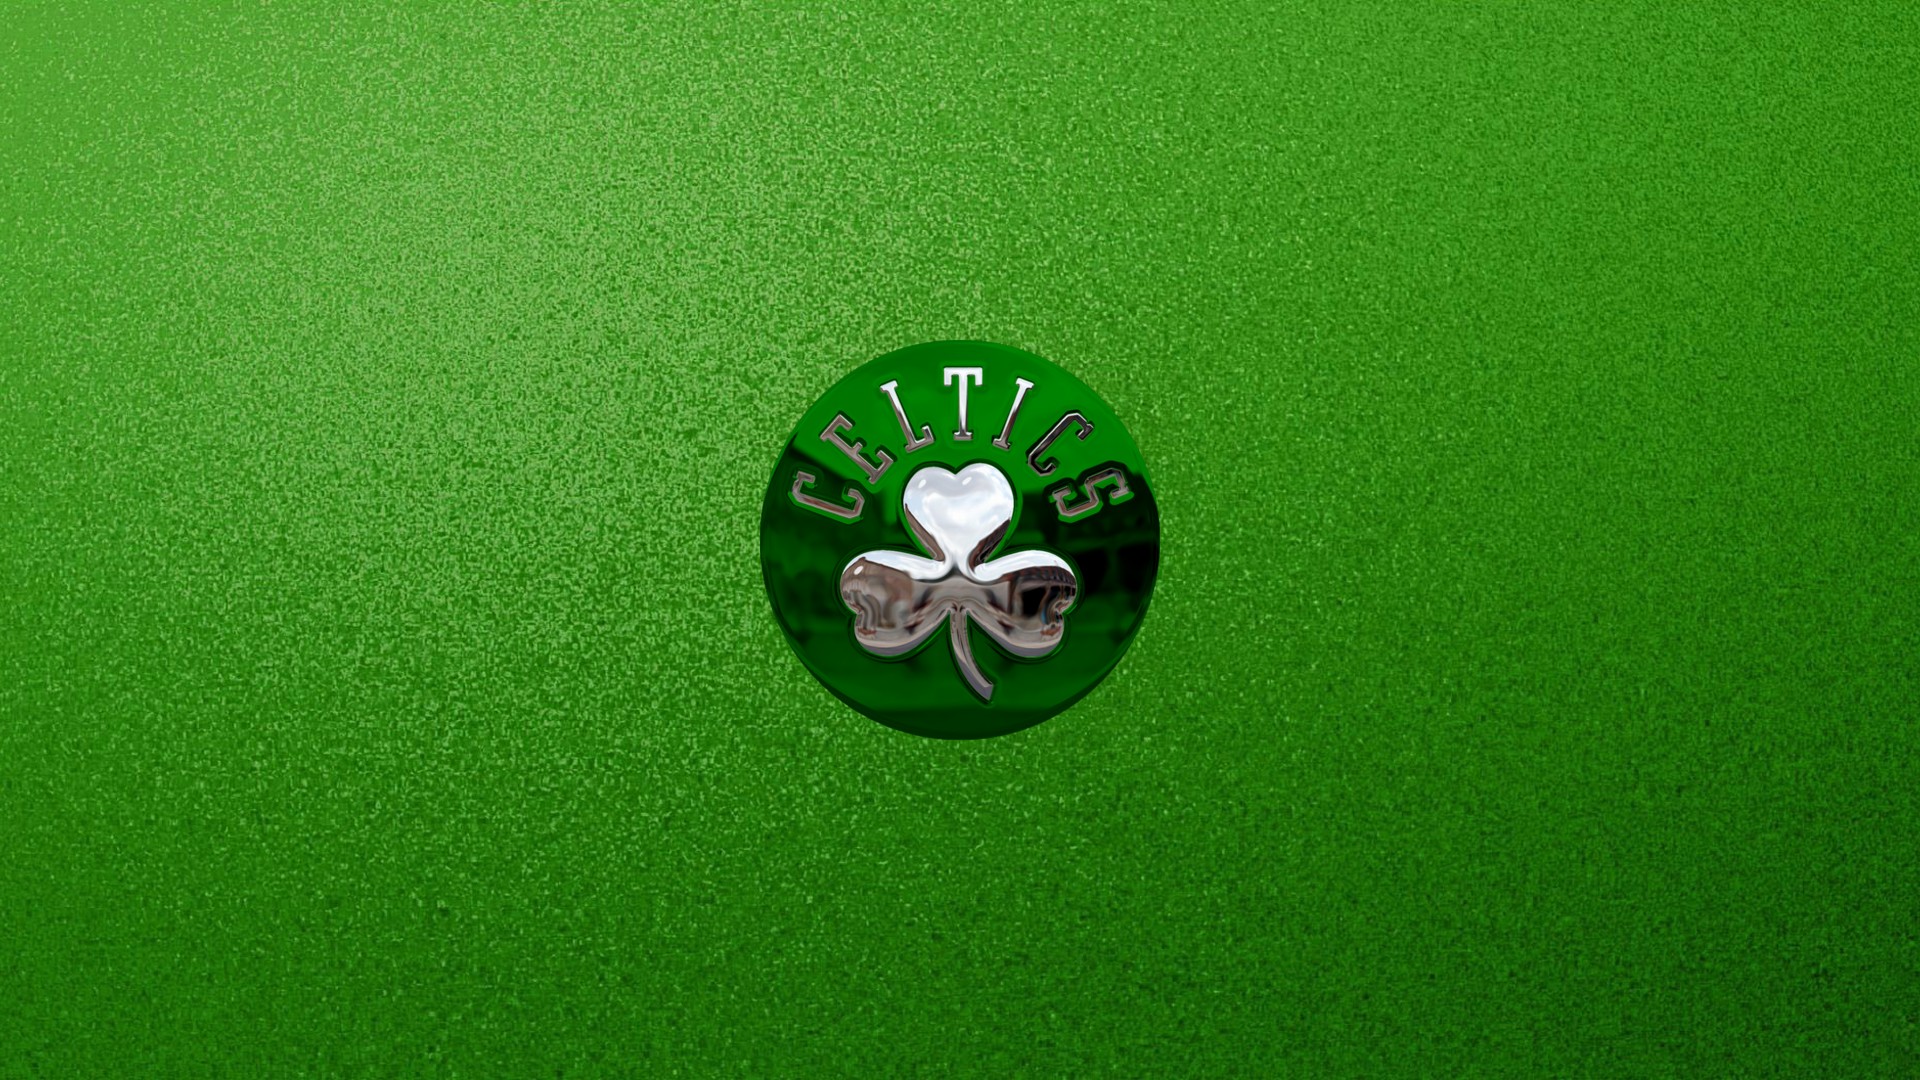 HD Backgrounds Boston Celtics with image dimensions 1920x1080 pixel. You can make this wallpaper for your Desktop Computer Backgrounds, Windows or Mac Screensavers, iPhone Lock screen, Tablet or Android and another Mobile Phone device